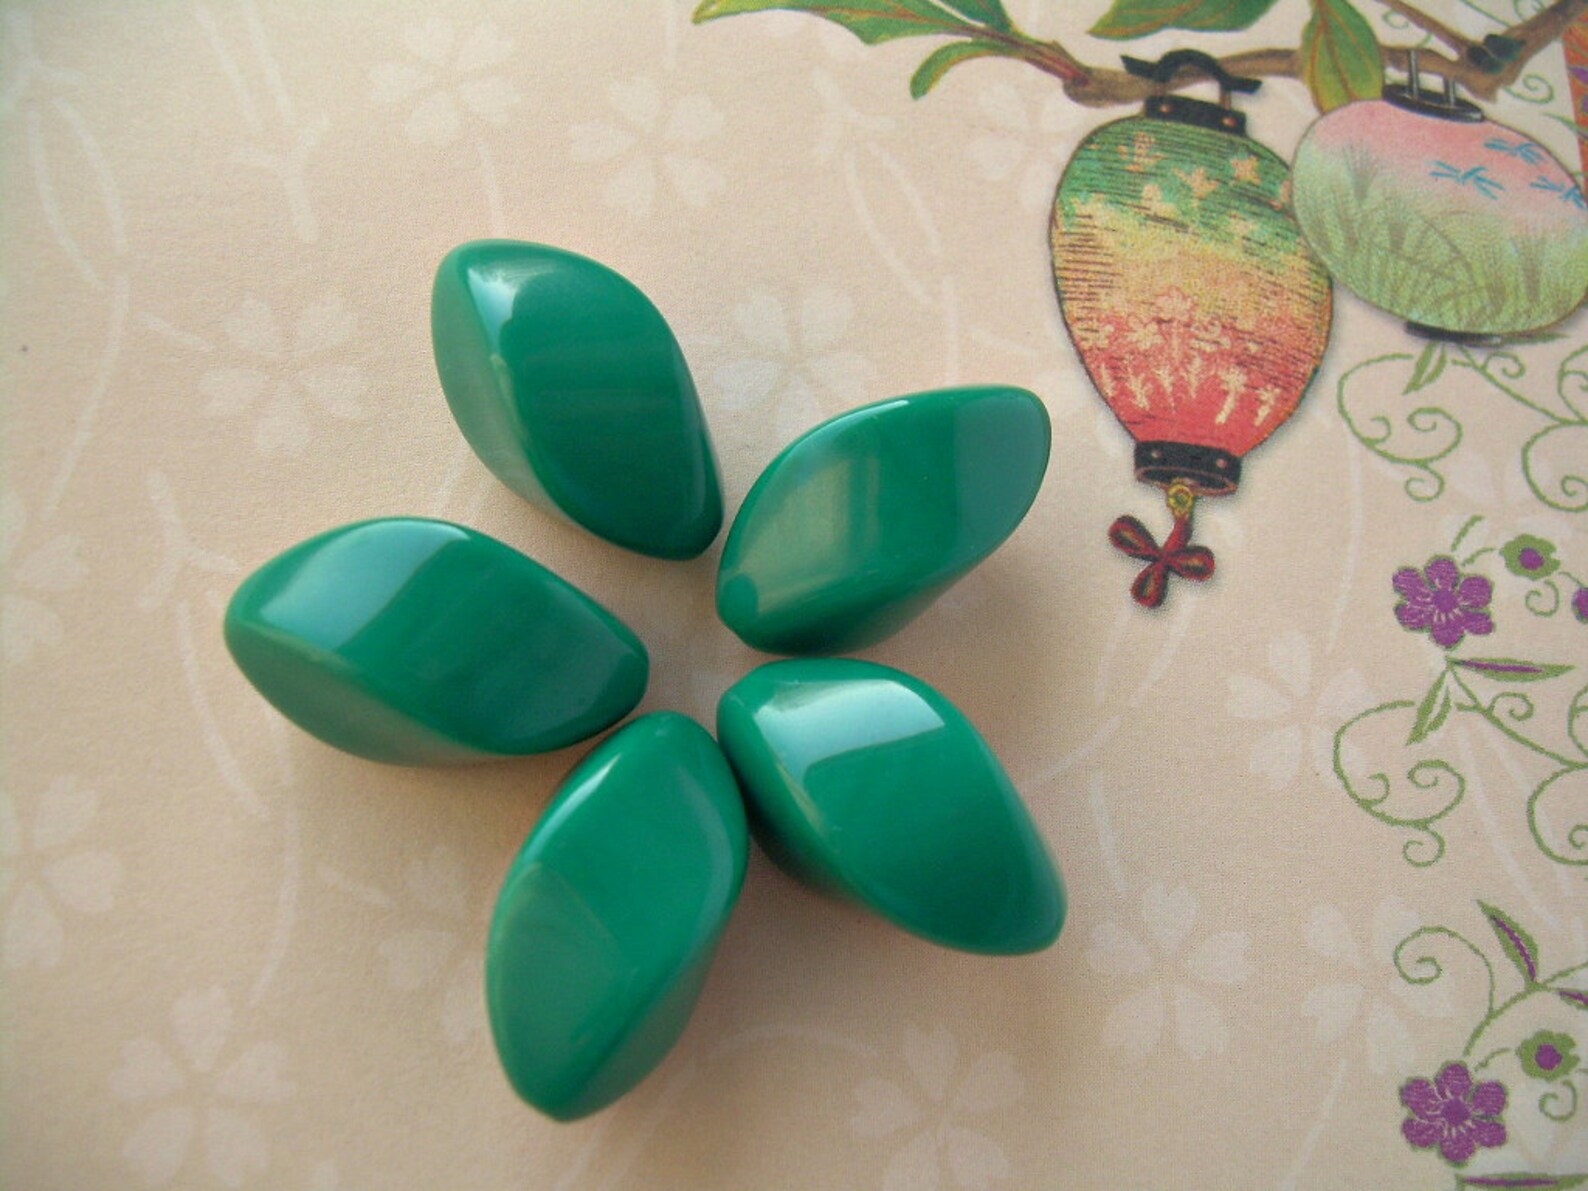 Vintage Lucite Beads Teal Green Oblong Twists 5